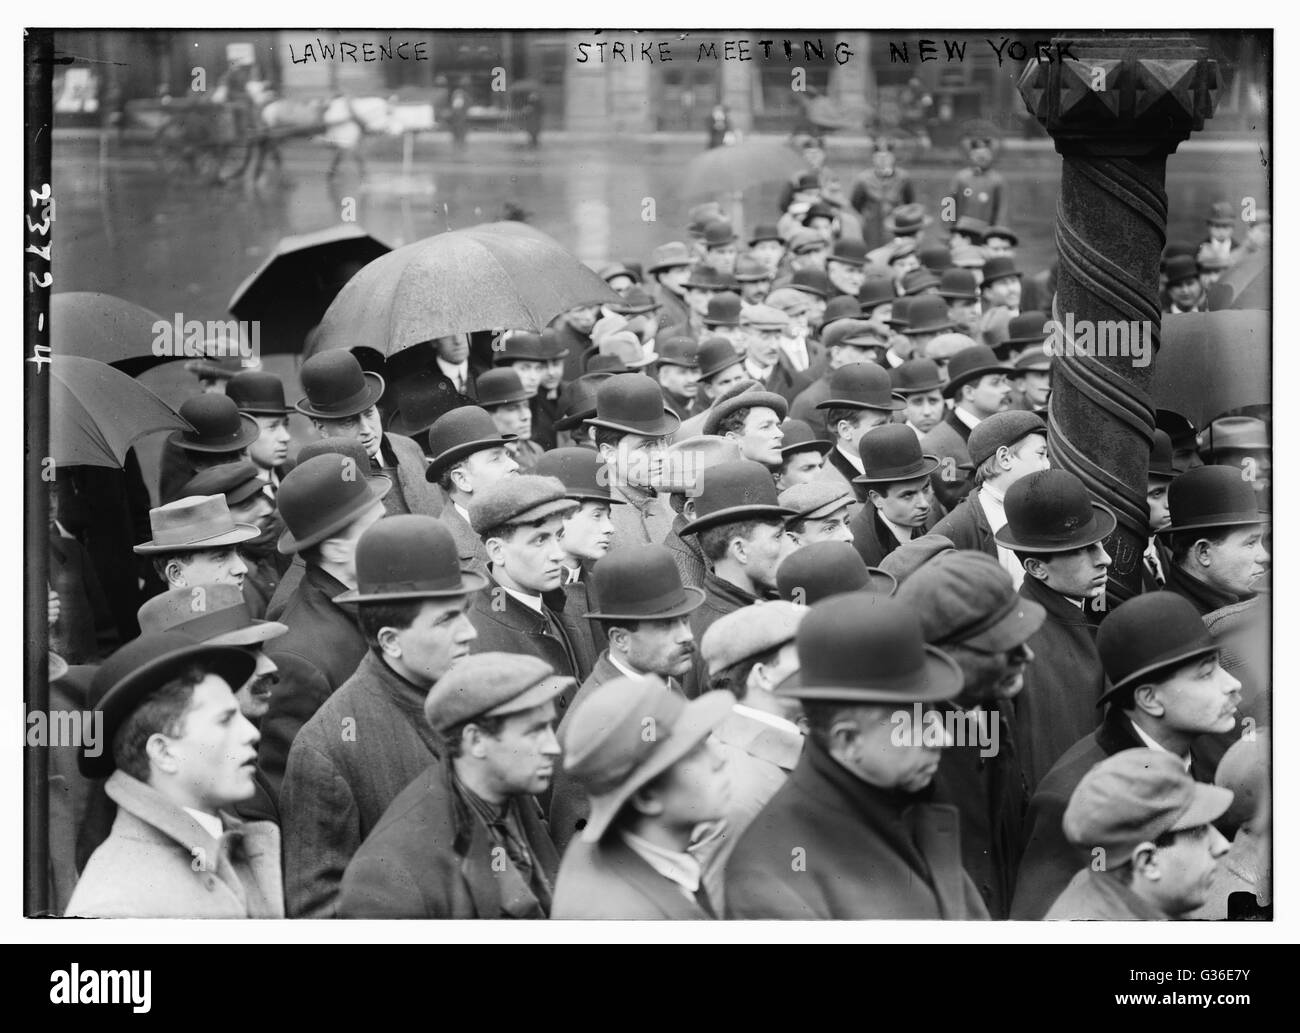 Men gather in New York City to listen to speeches in support of the Lawrence, Massachusetts Textile Strike. Stock Photo